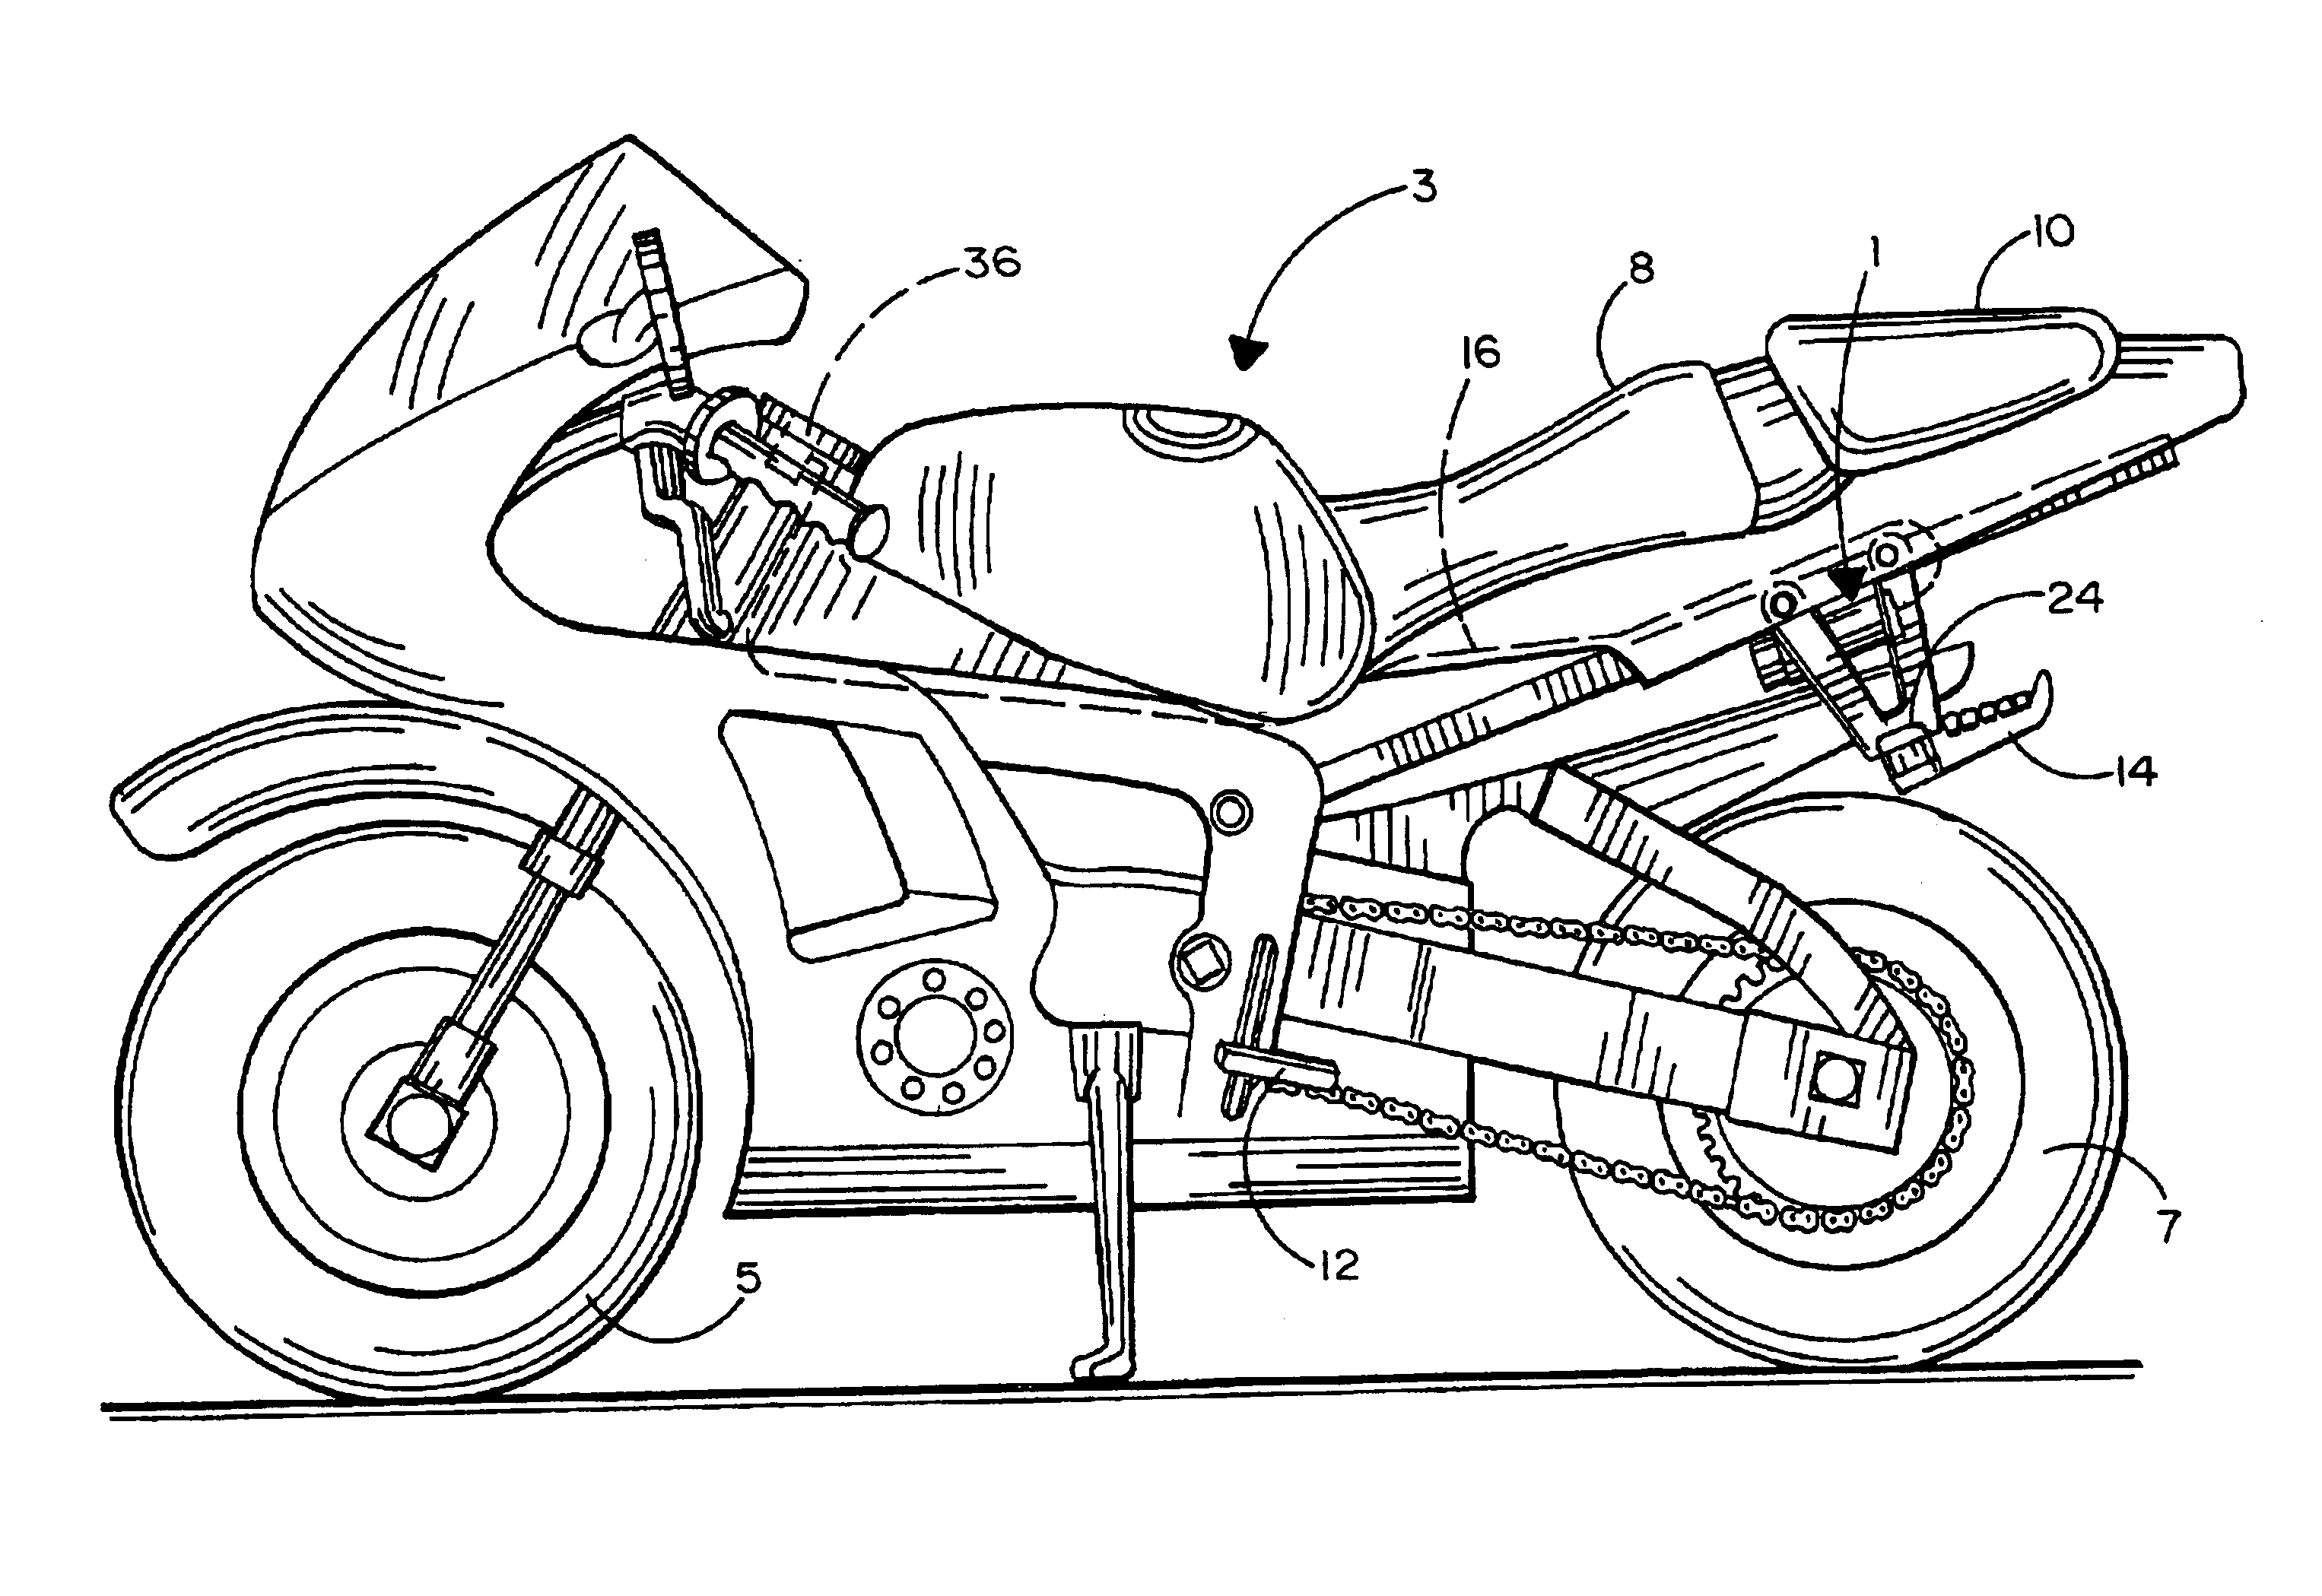 Engine control tilt switch for motorcycles